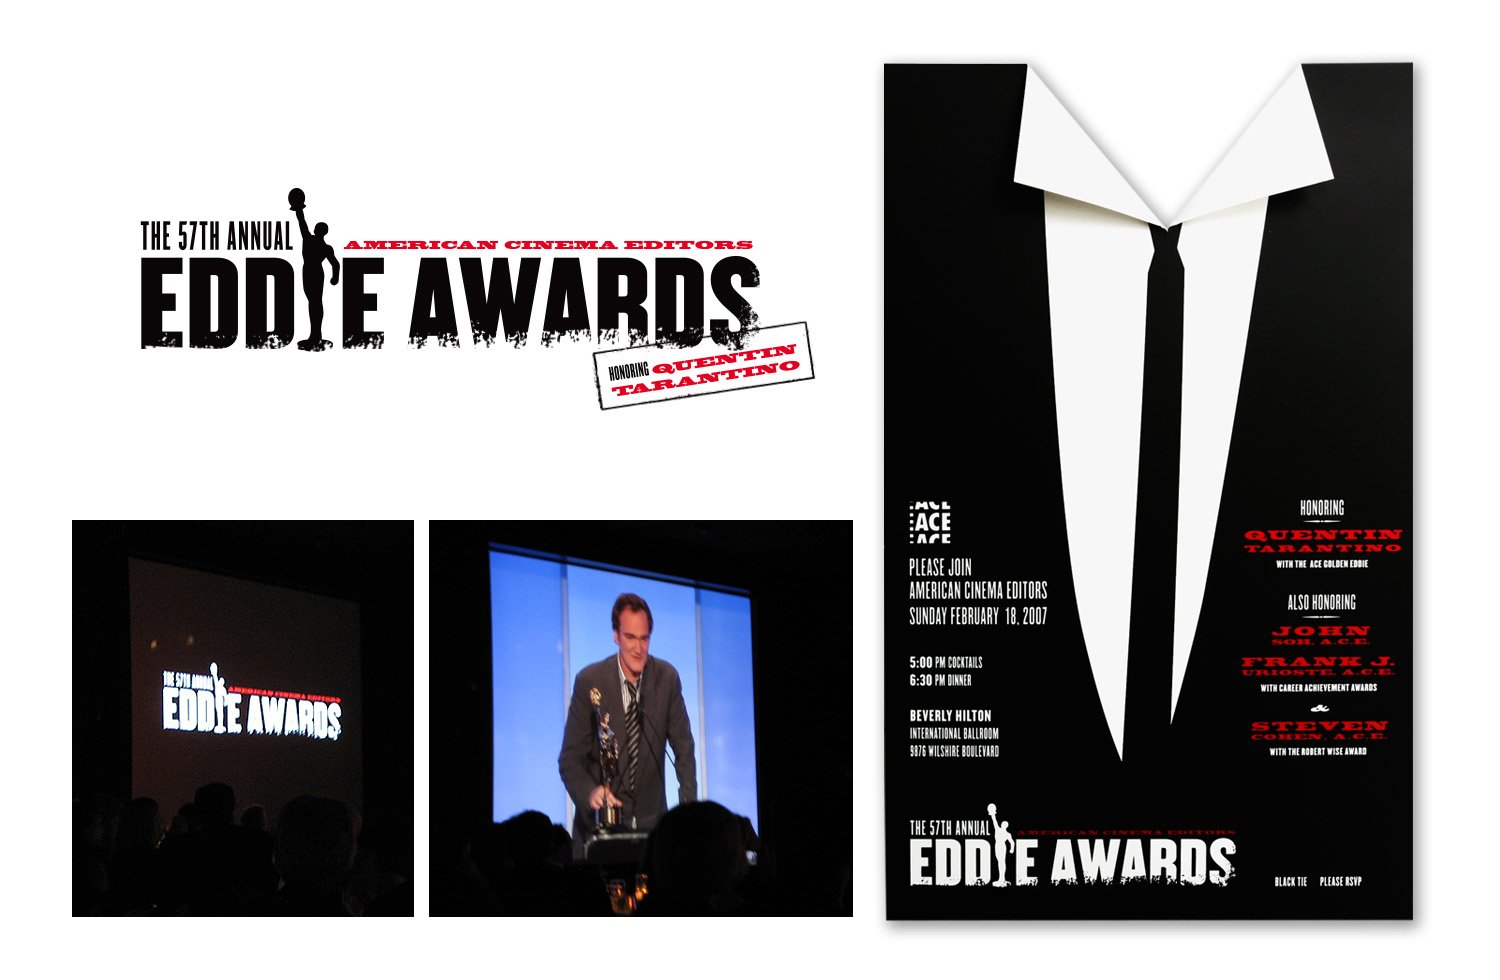  Event branding, art direction, invitation and collateral for the 59th Annual American Cinema Editors "Eddie" Awards honoring Quentin Tarantino. 